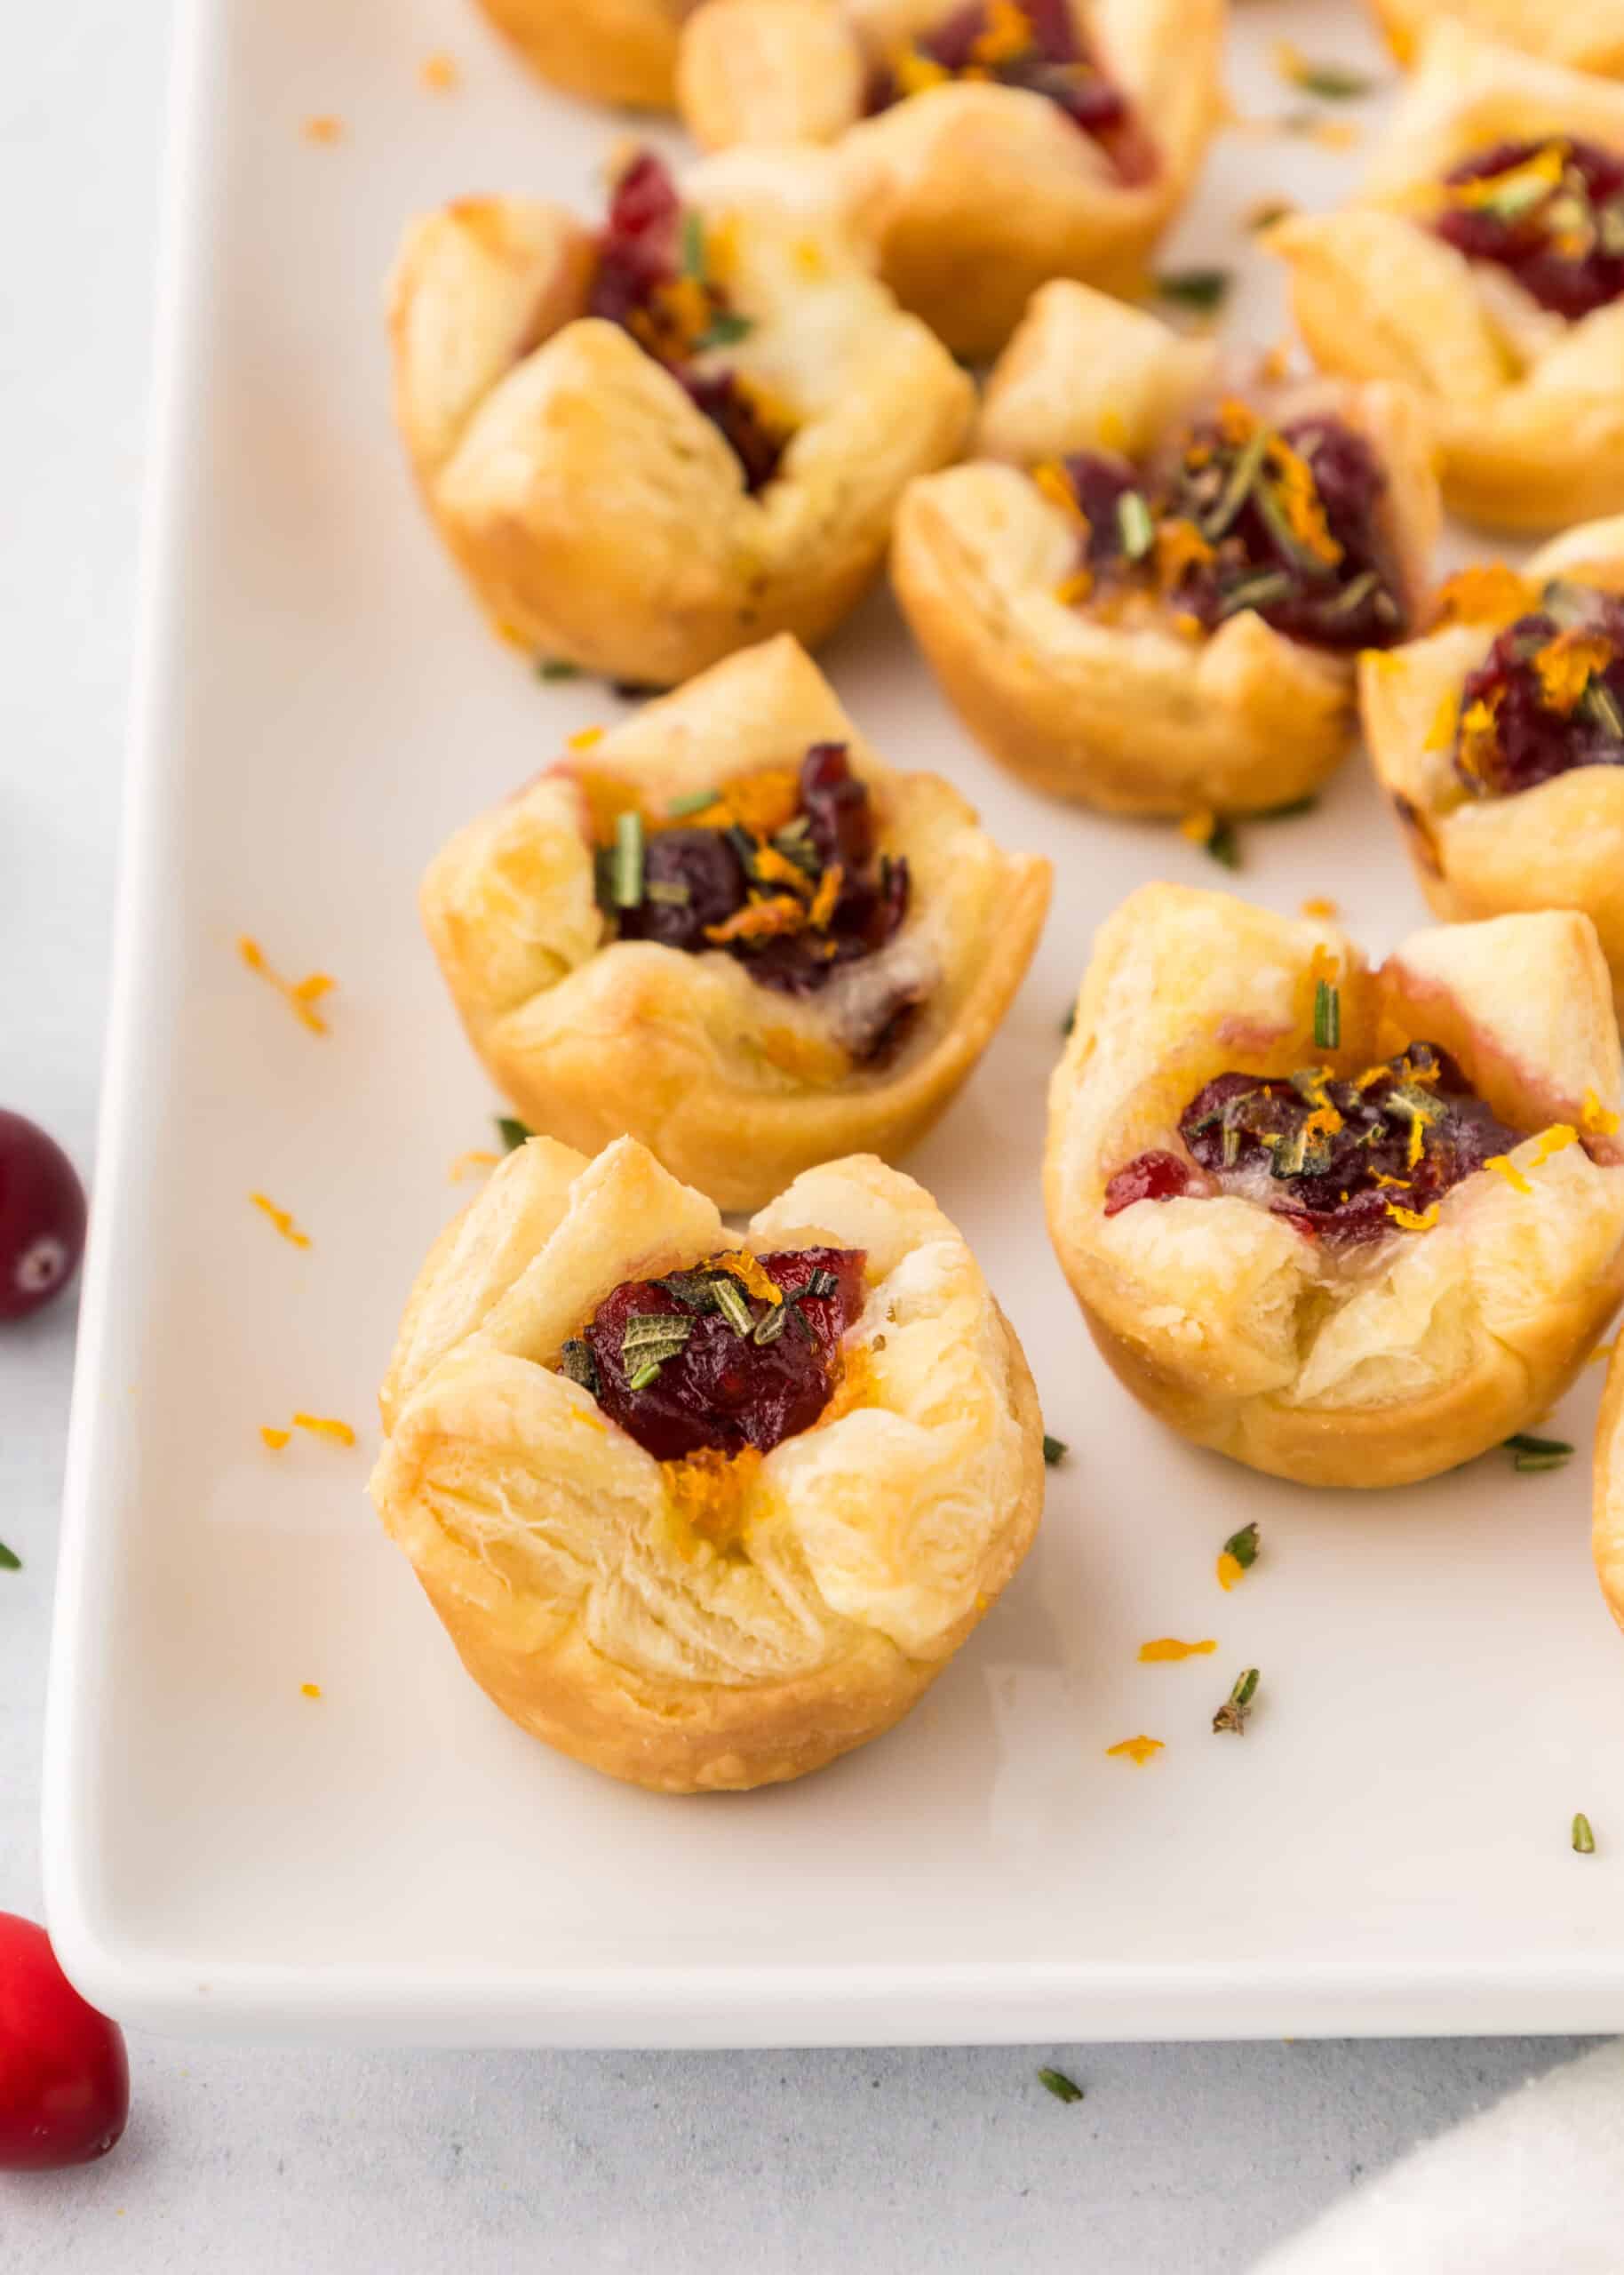 Cranberry and Camembert Bites with Rosemary (Camembert pastry bites)